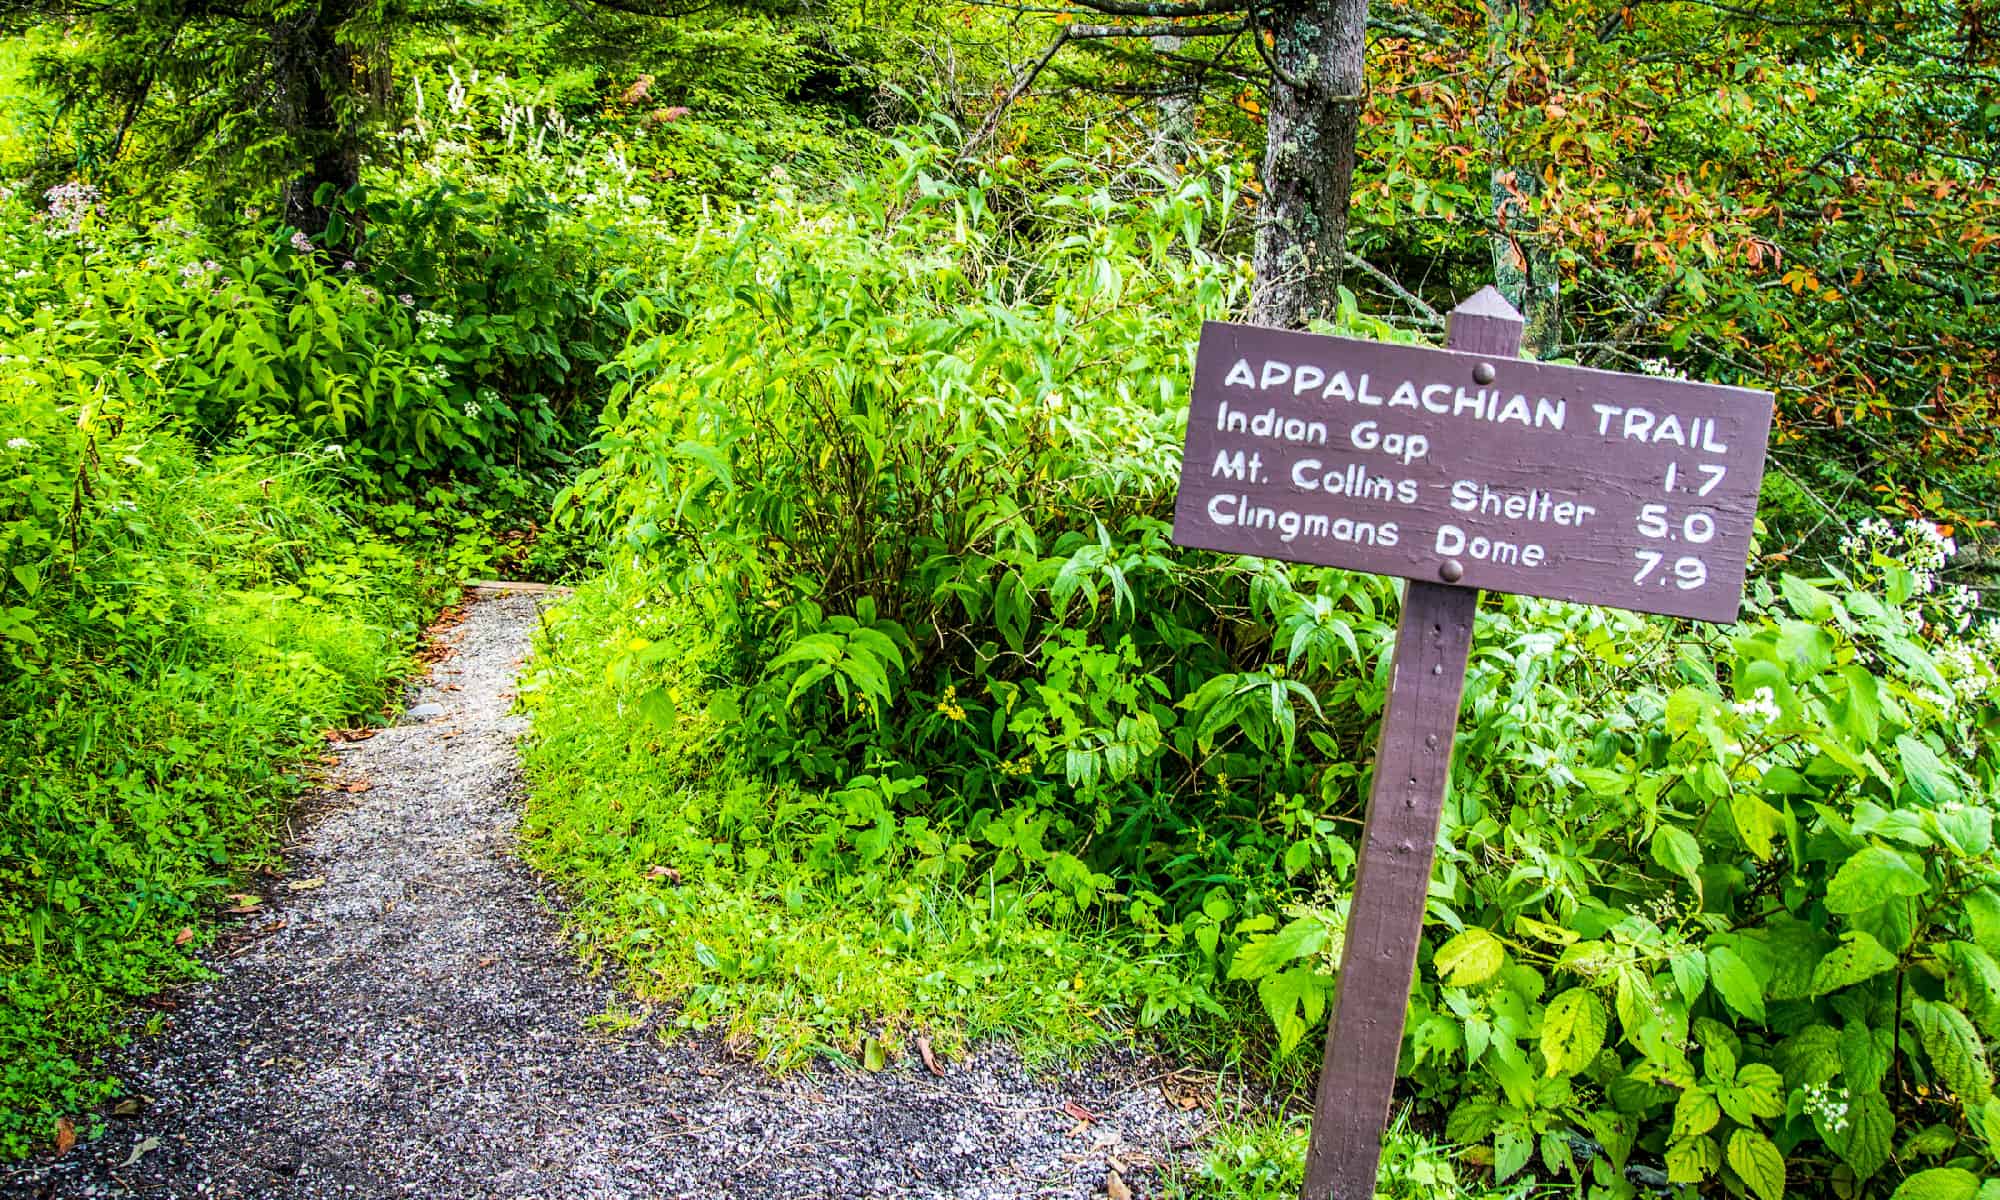 Appalachian Trail, Hiking, Sign, Great Smoky Mountains, High Angle View